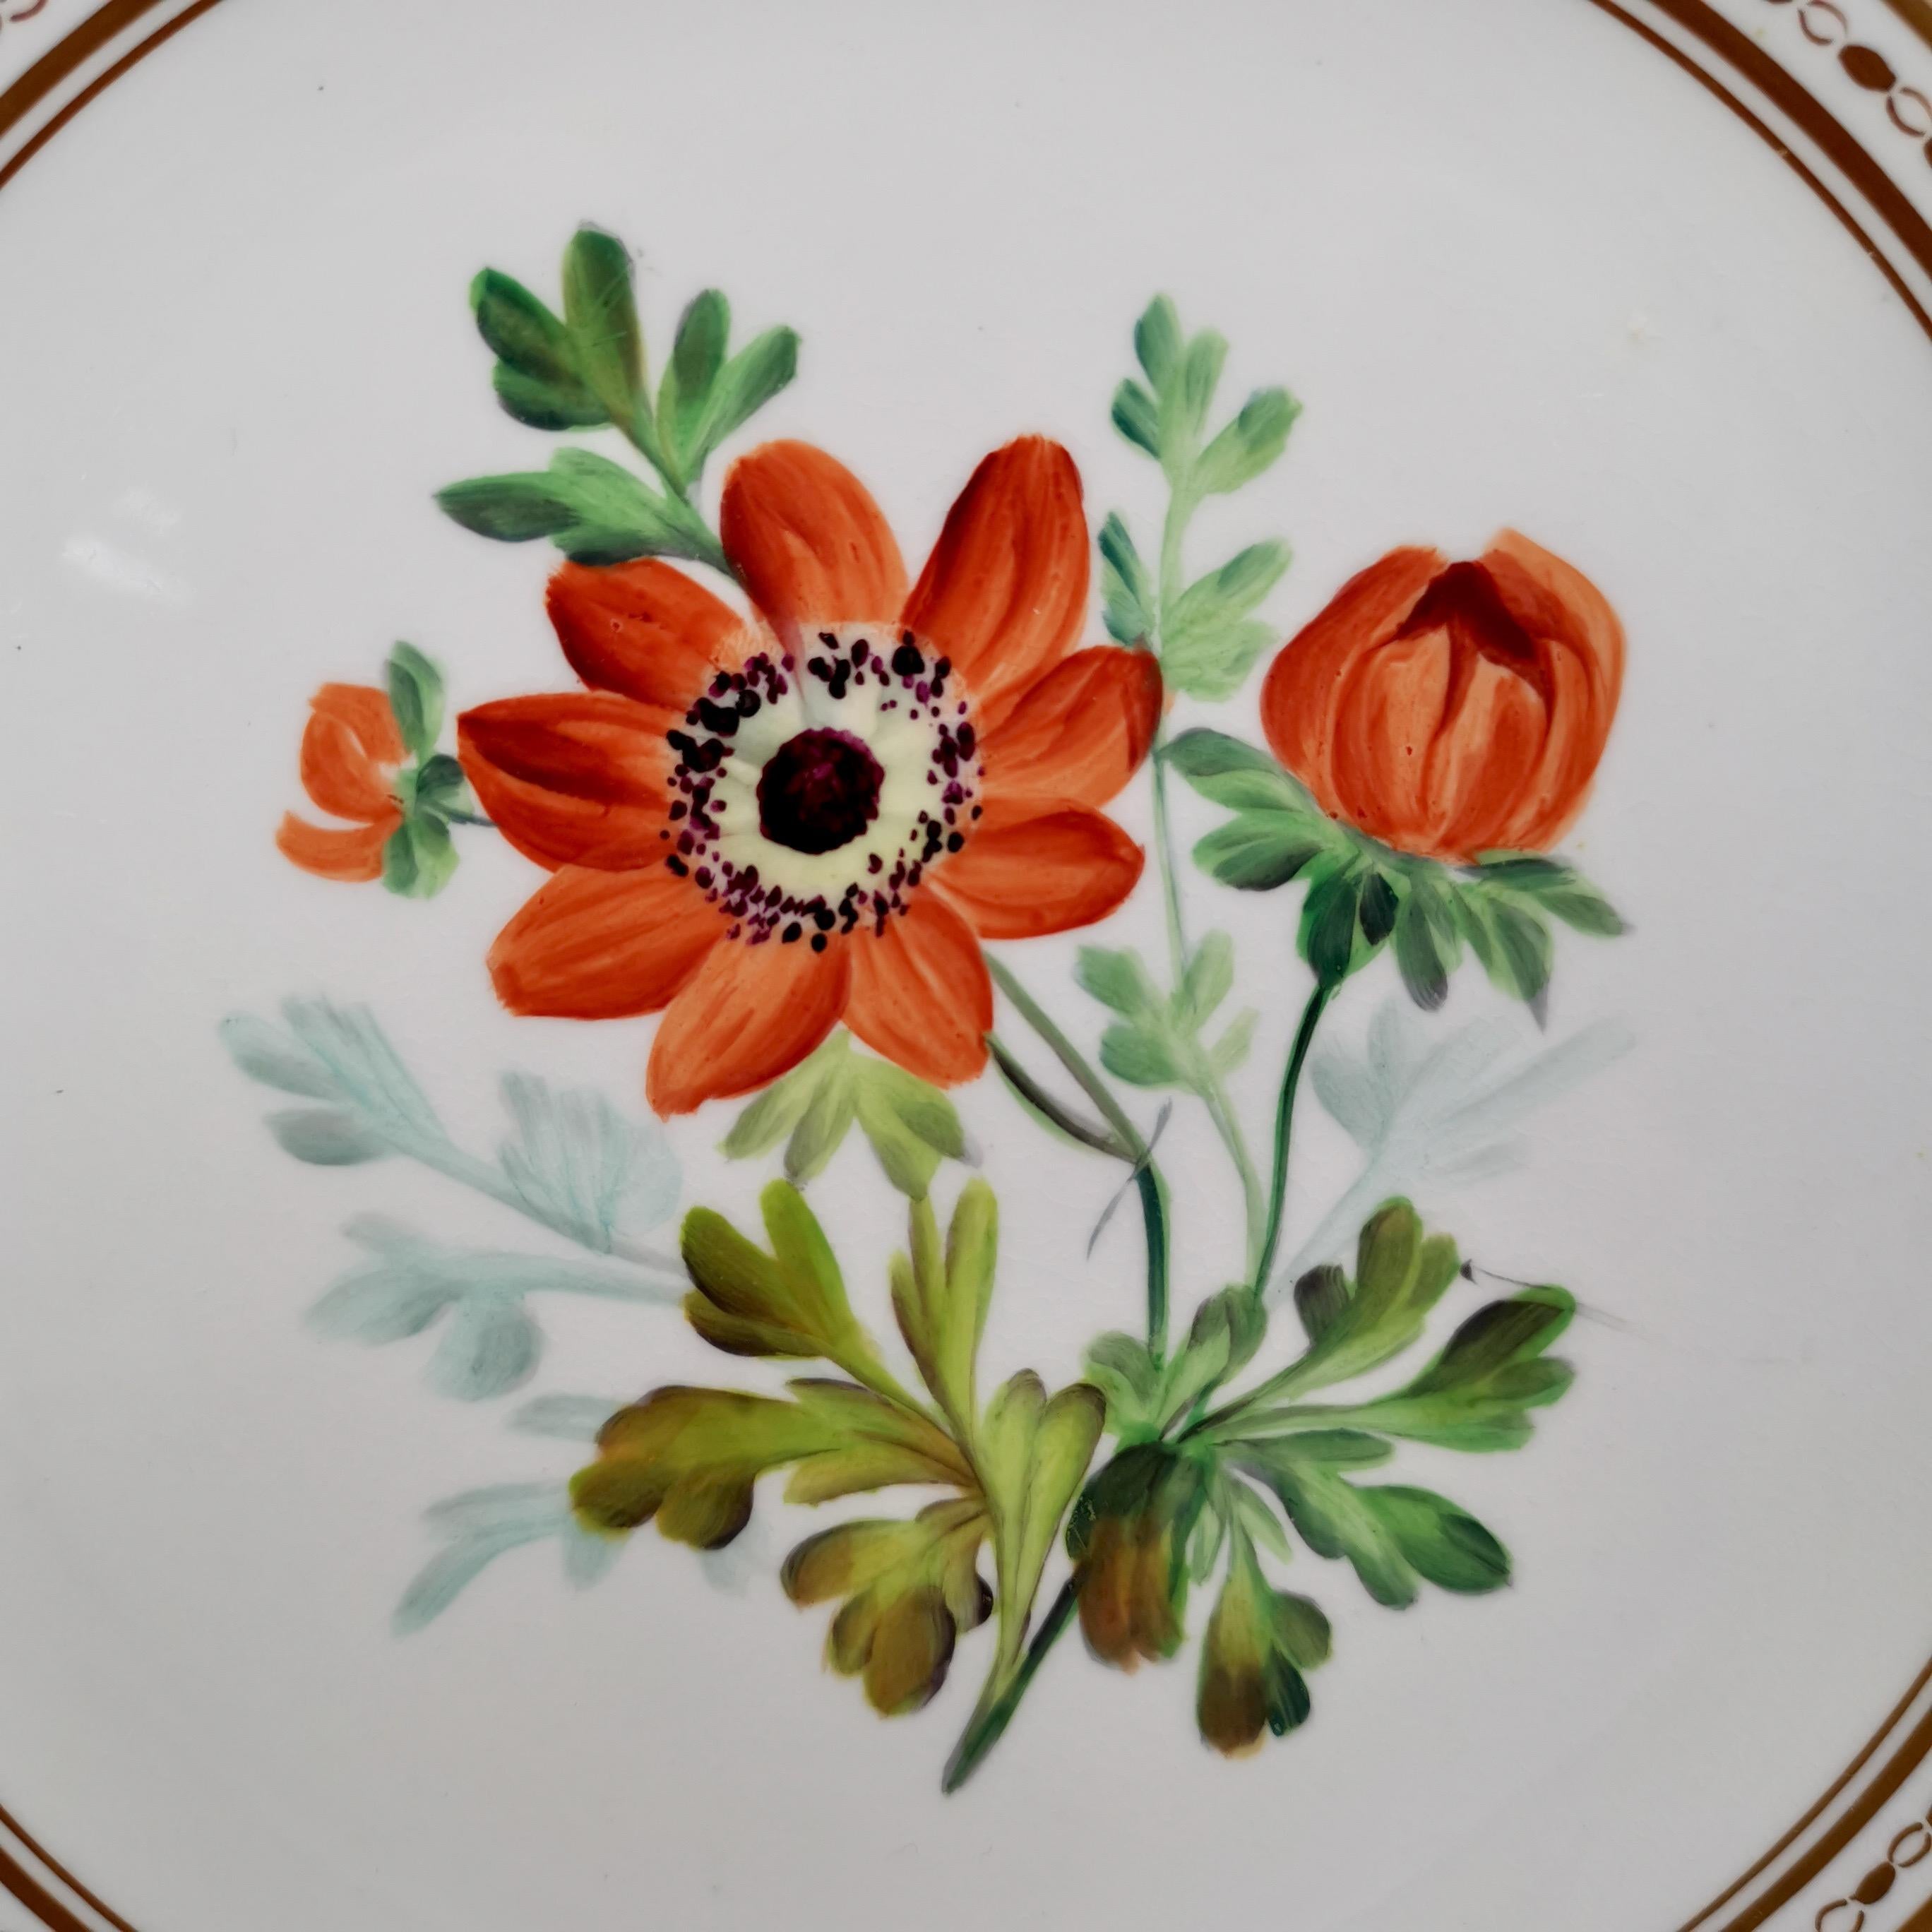 English Minton Pair of Plates, Peach with Flowerse, Argyle Style, ca 1850